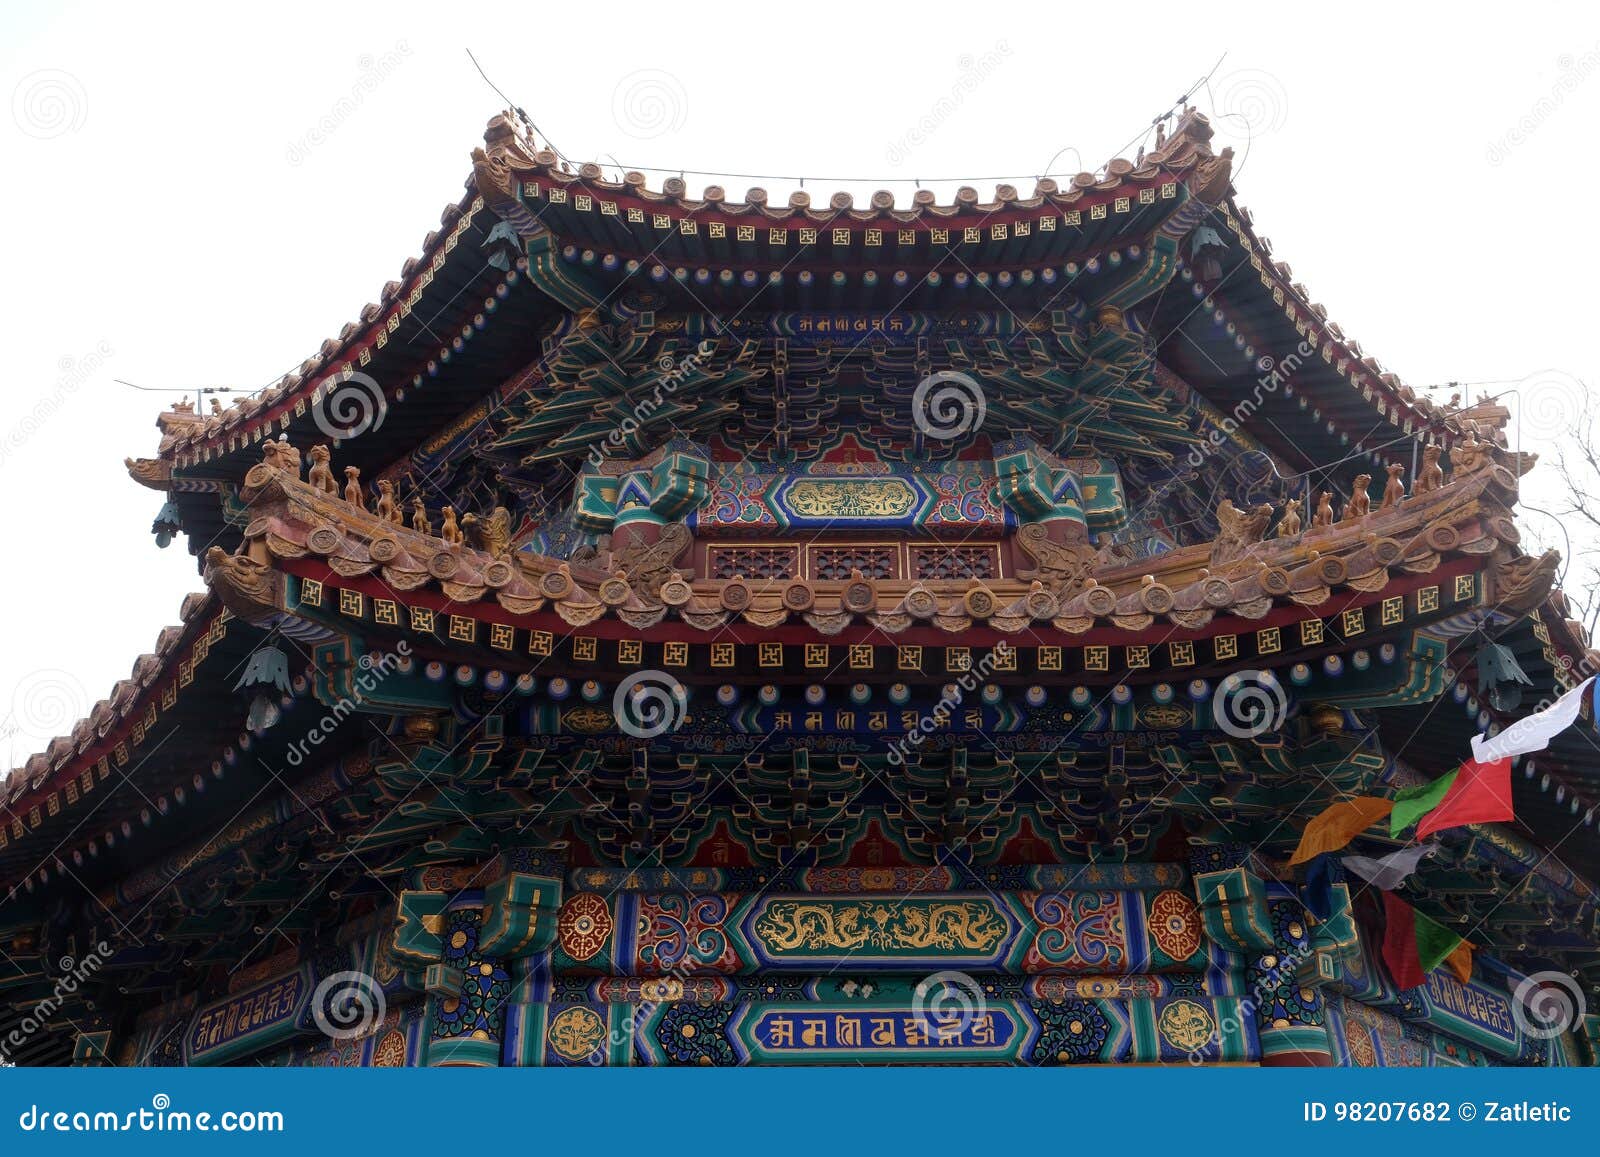 colorful ceiling decoration at the of the lama yonghe temple in beijing